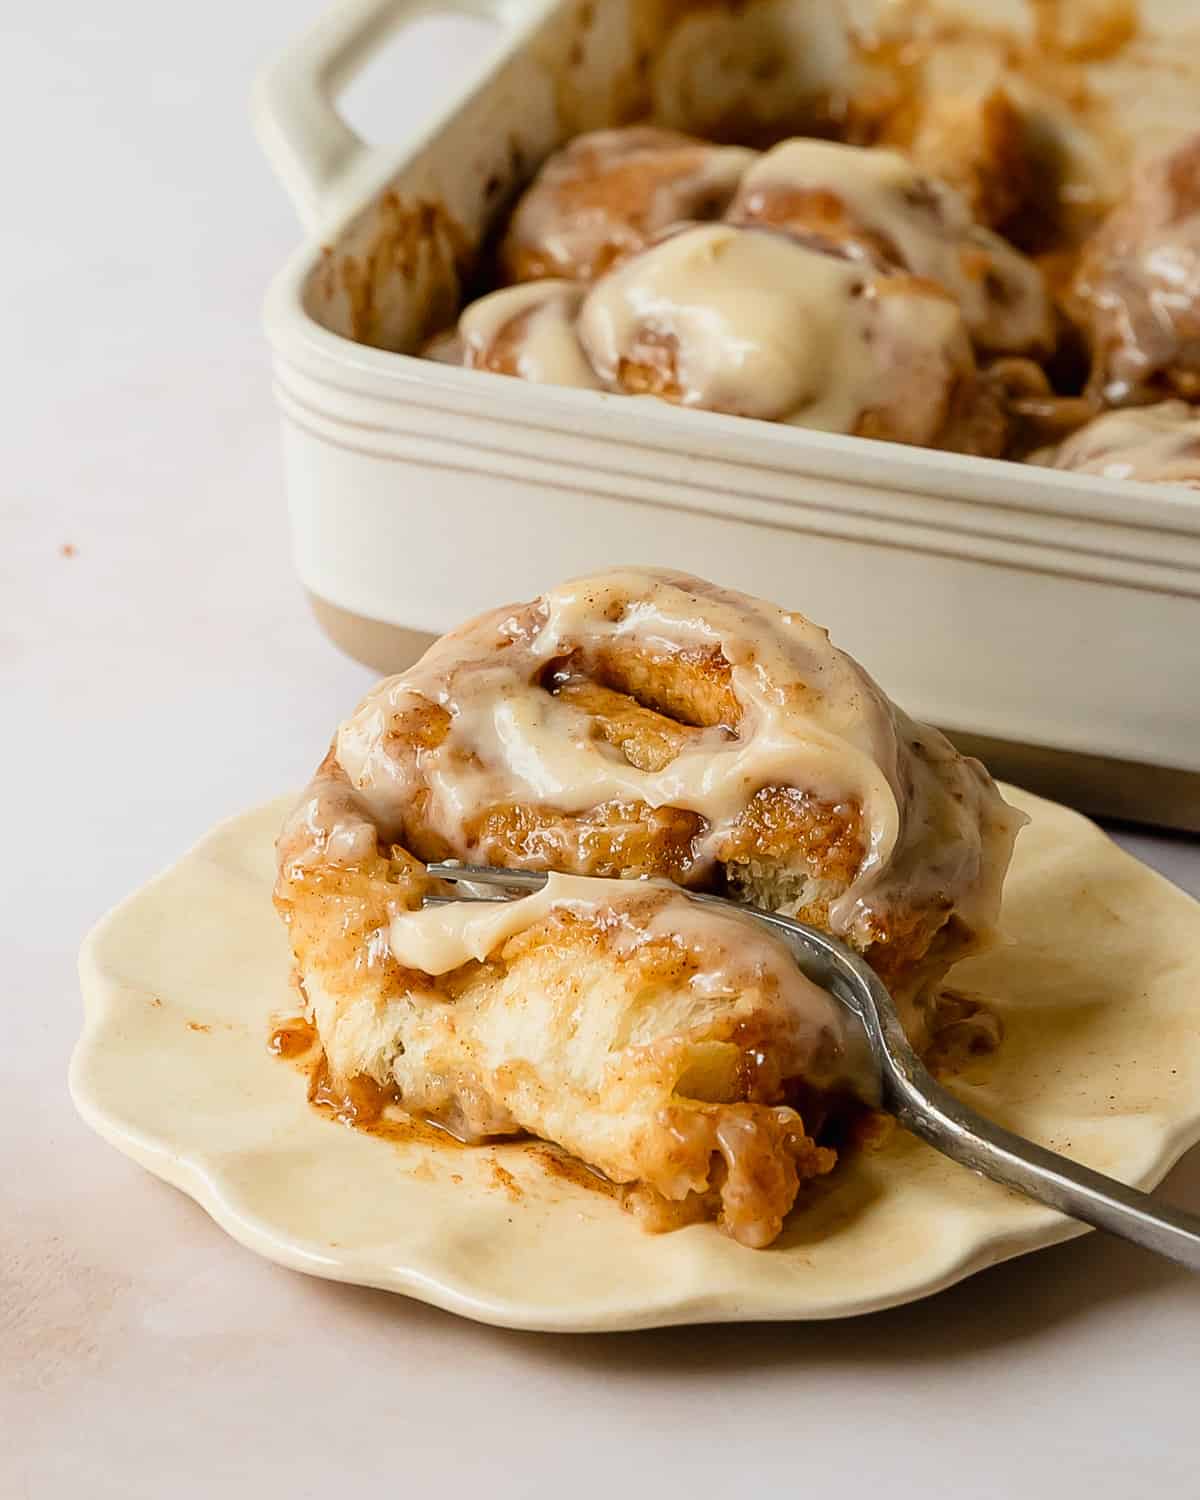 Cinnamon rolls with heavy cream is a clever and easy to make Tik Tok cinnamon roll hack that transforms canned cinnamon buns into light, fluffy and moist, bakery worthy cinnamon rolls. These deliciously gooey cinnamon rolls are topped with a brown sugar and cinnamon butter before baking and with a luscious cream cheese icing after baking. Grab your favorite store bought cinnamon rolls and make a decadent and easy breakfast treat everyone is sure to love!